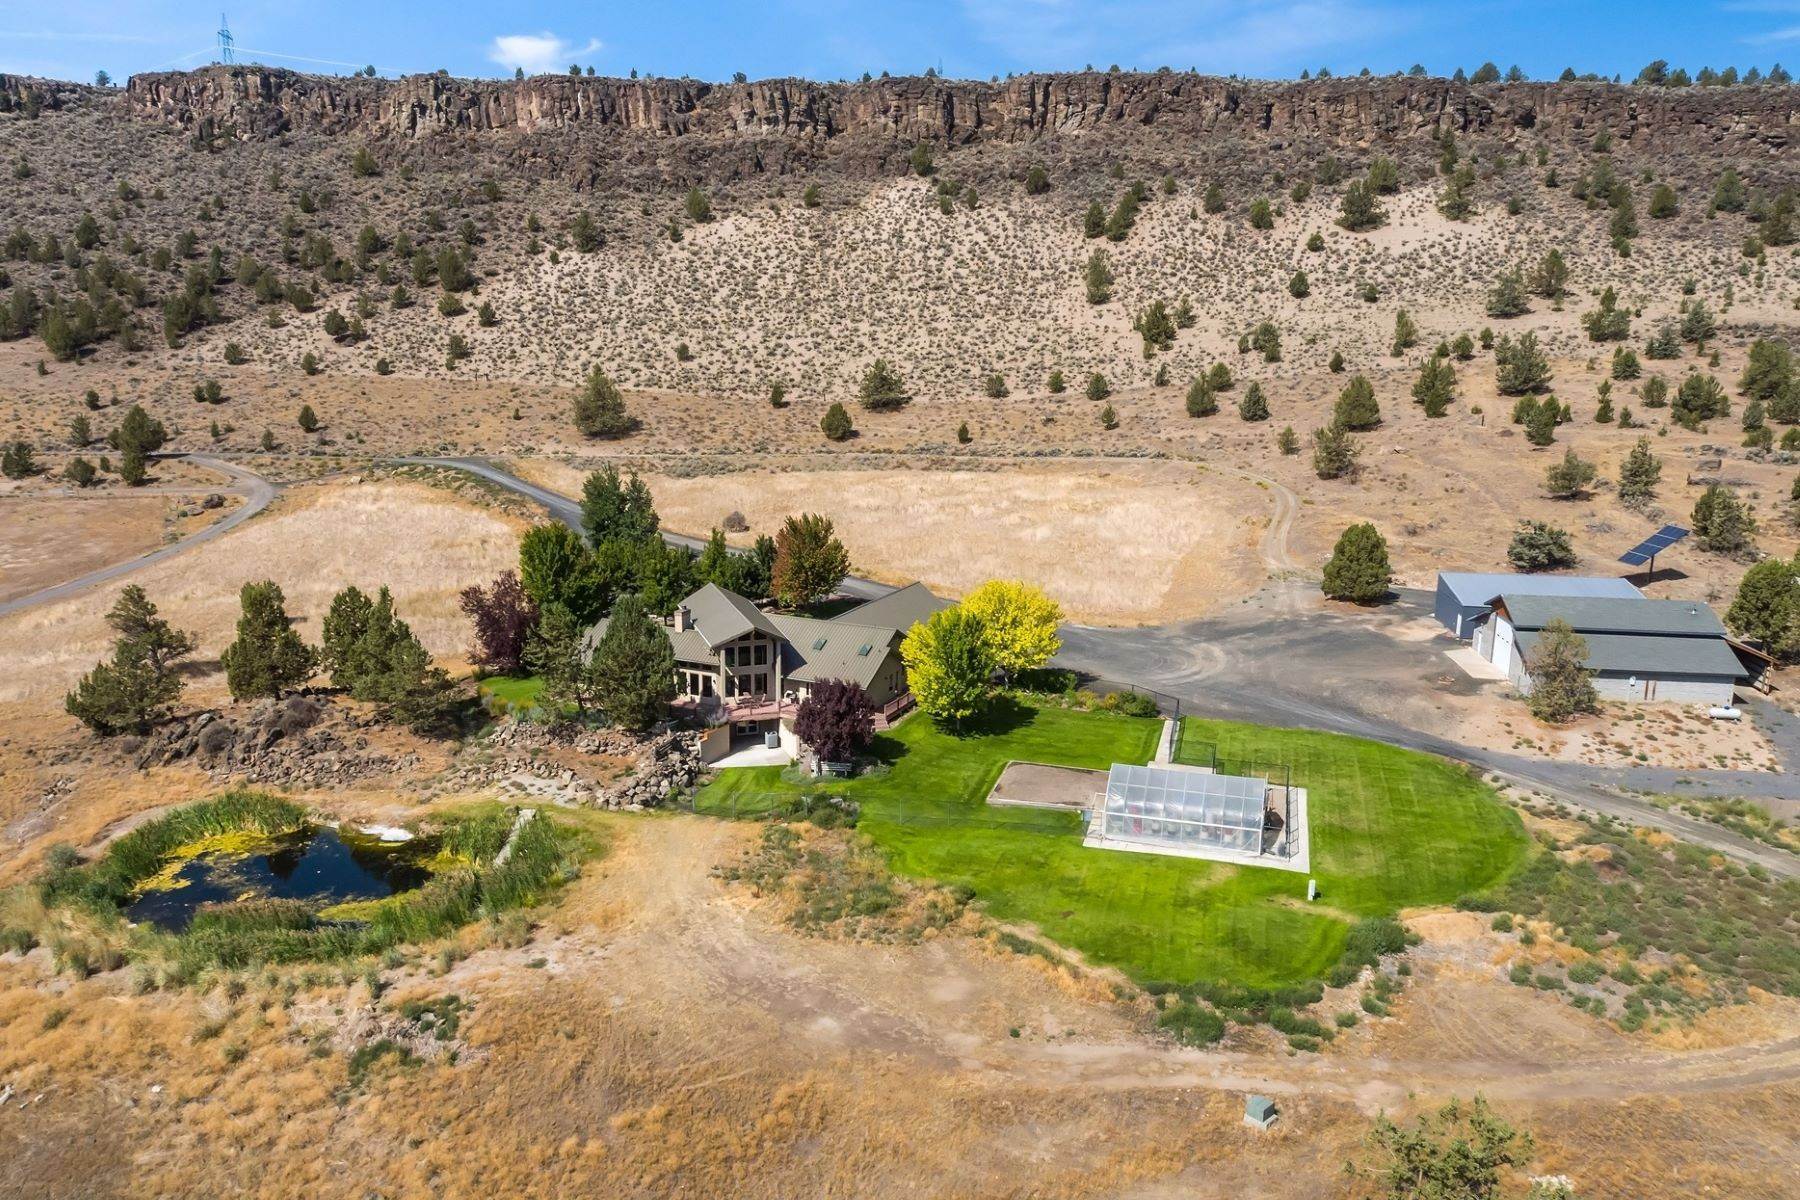 Other Residential Homes for Sale at 6100 NW Spring Creek Road Prineville, OR 97754 6100 NW Spring Creek Road Prineville, Oregon 97754 United States